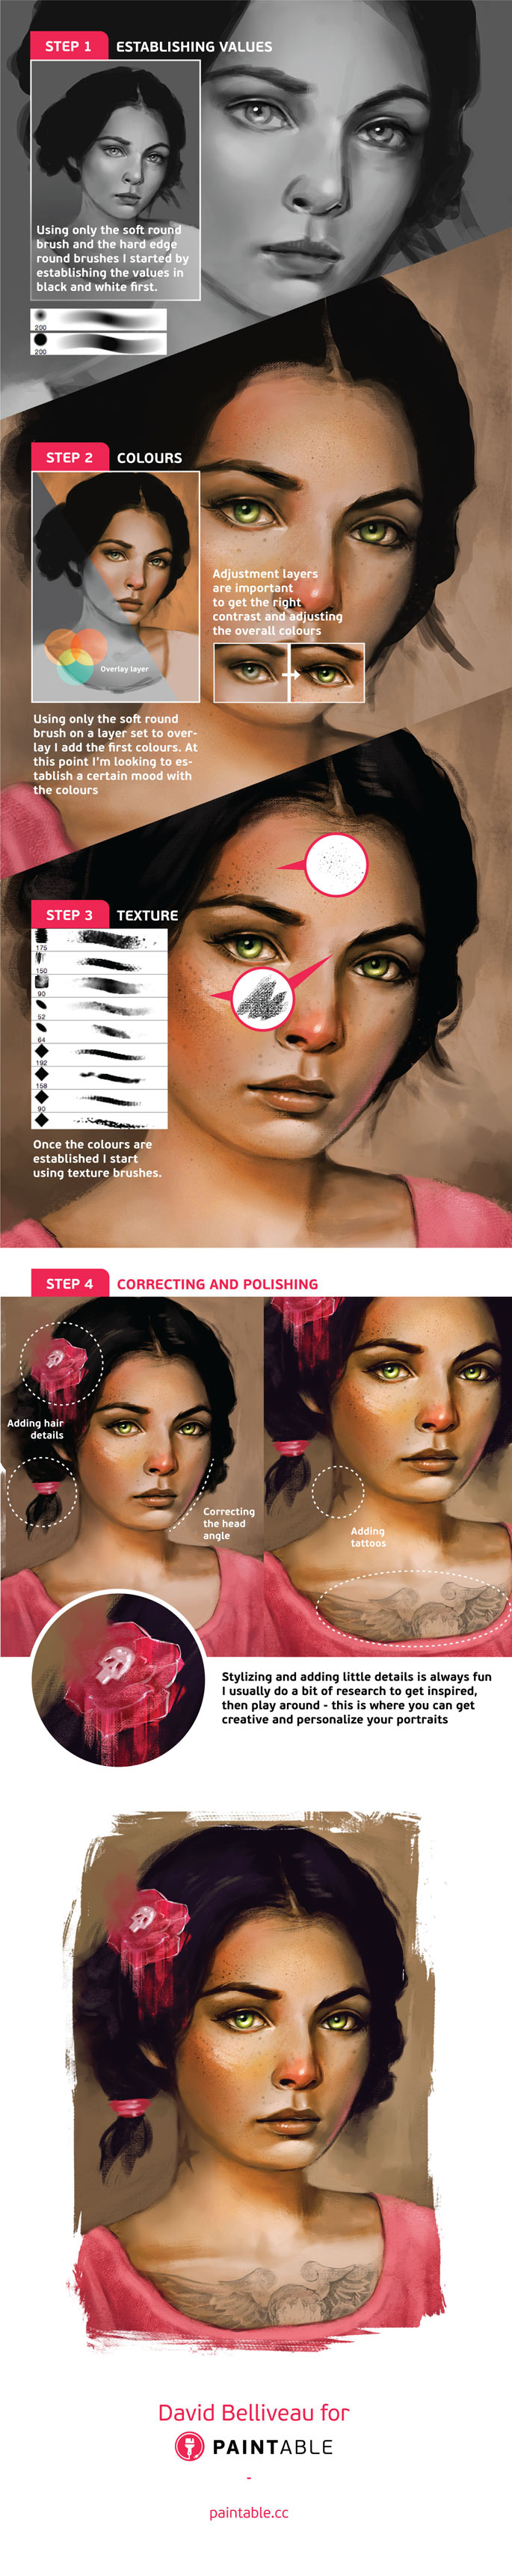 Digital Painting Process: The Making of "Luna"